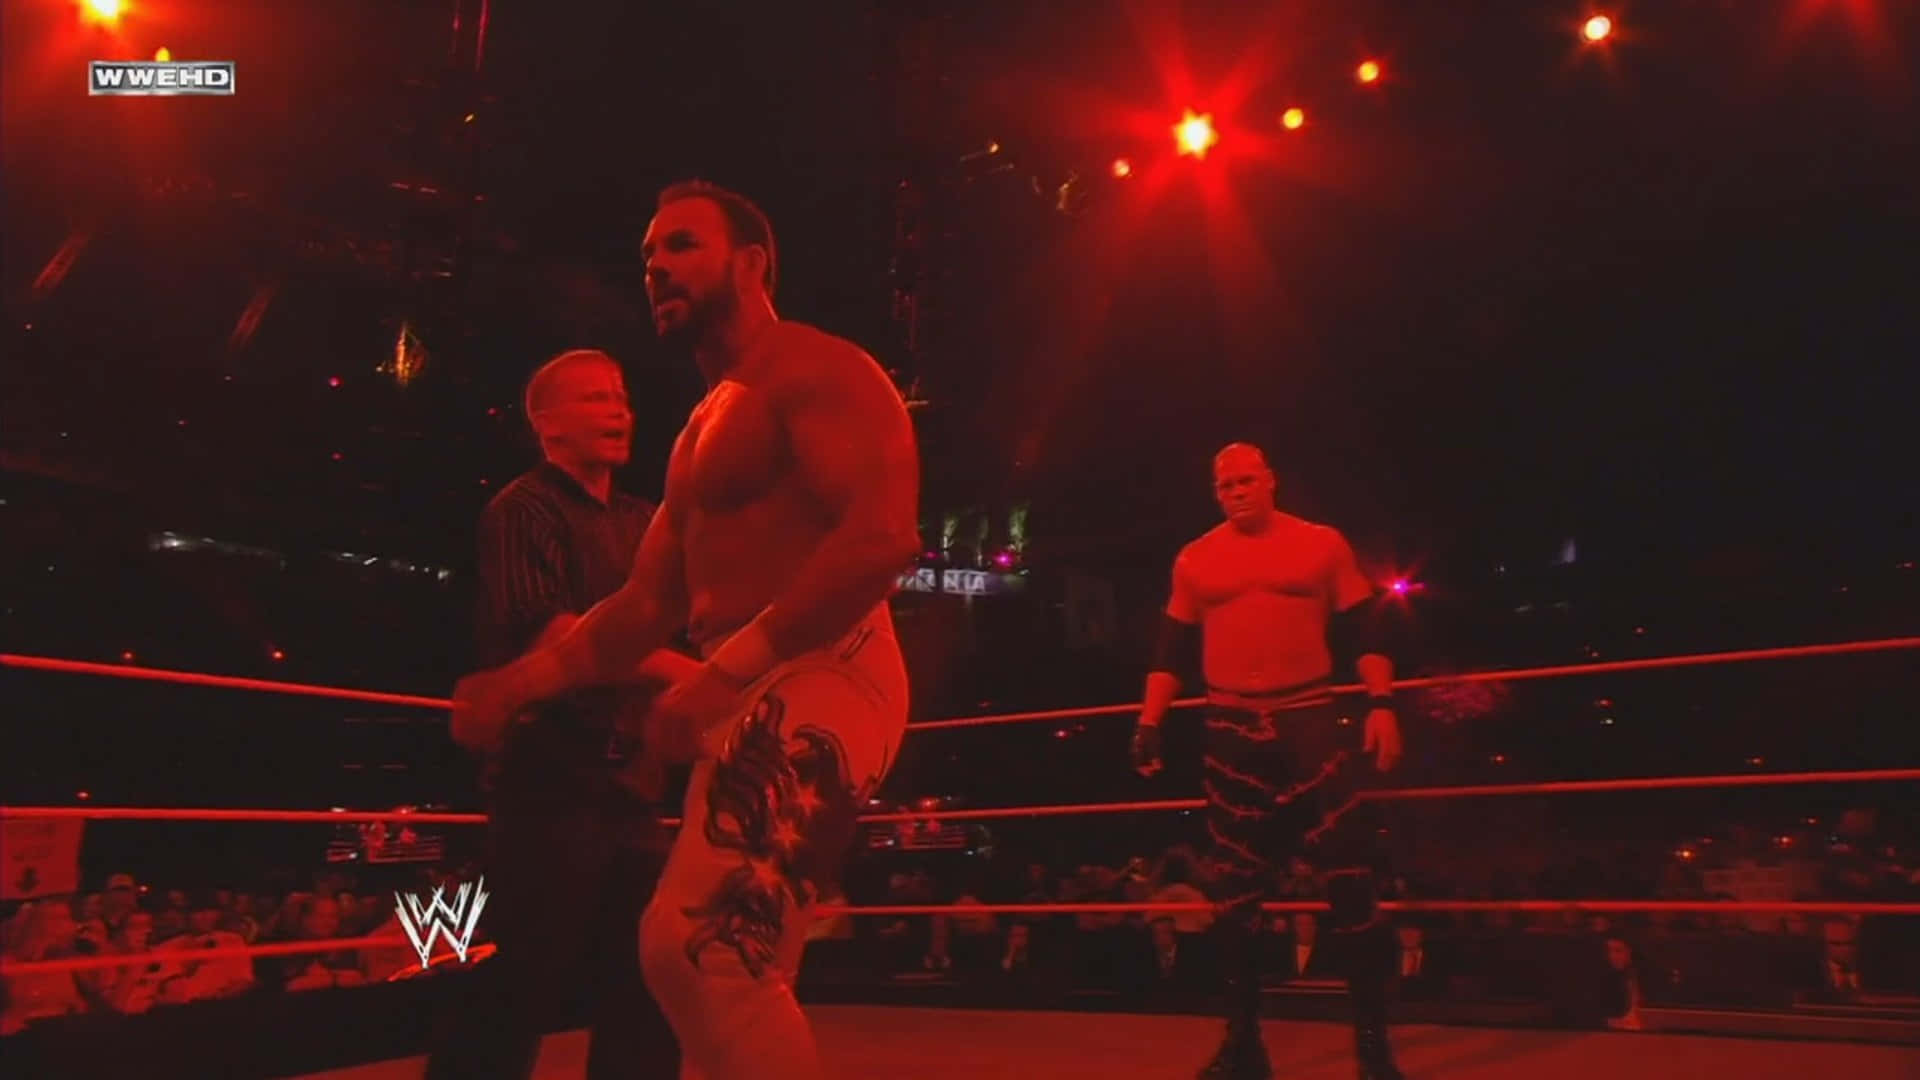 Chavo Guerrero faces off against Cain in an electrifying wrestling match Wallpaper